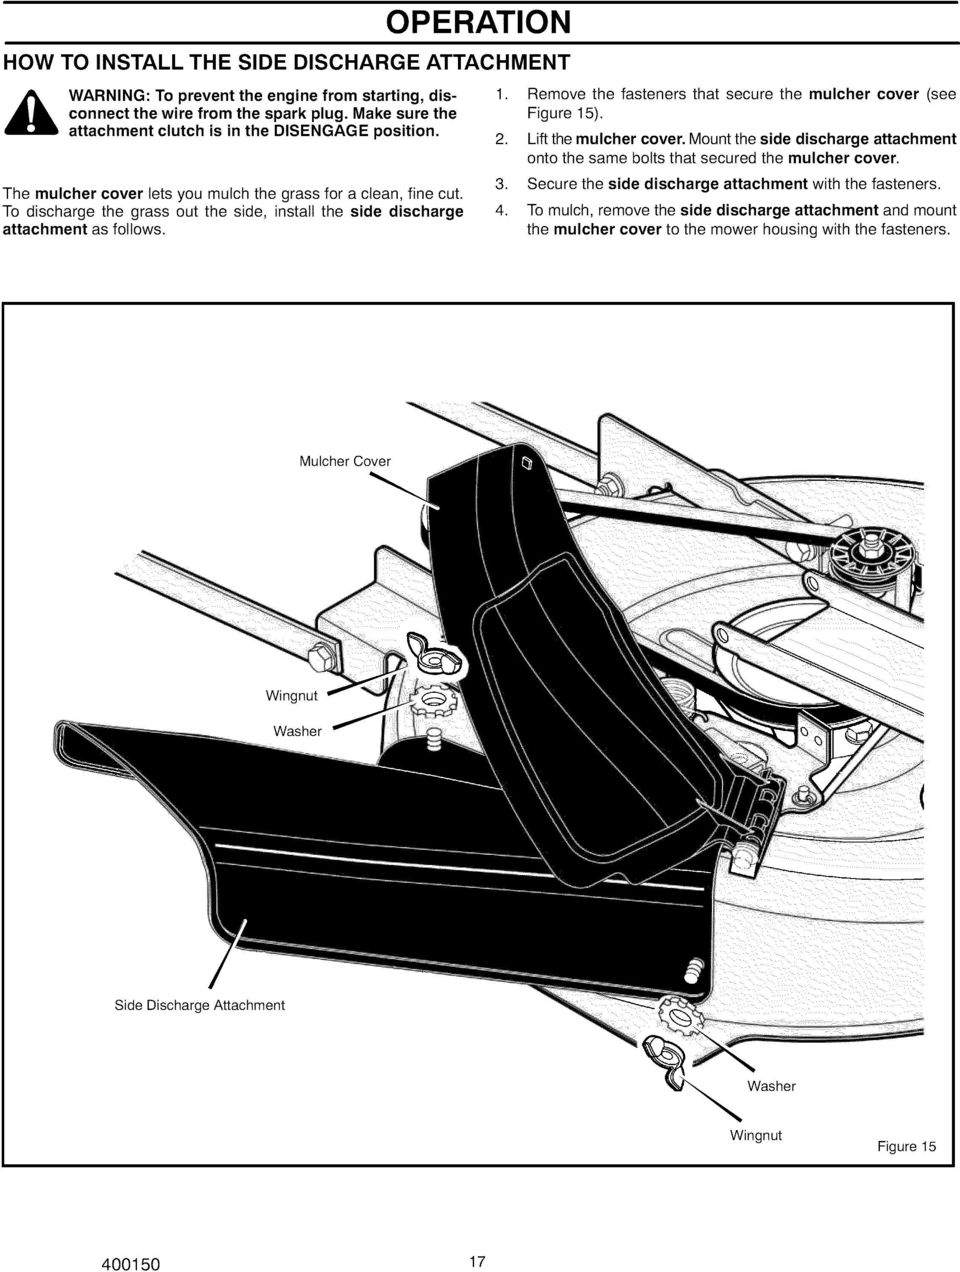 To discharge the grass out the side, install the side discharge attachment as follows. 1, 2. 3. 4. Remove the fasteners that secure the mulcher cover (see Figure 15). Lift the mulcher cover.